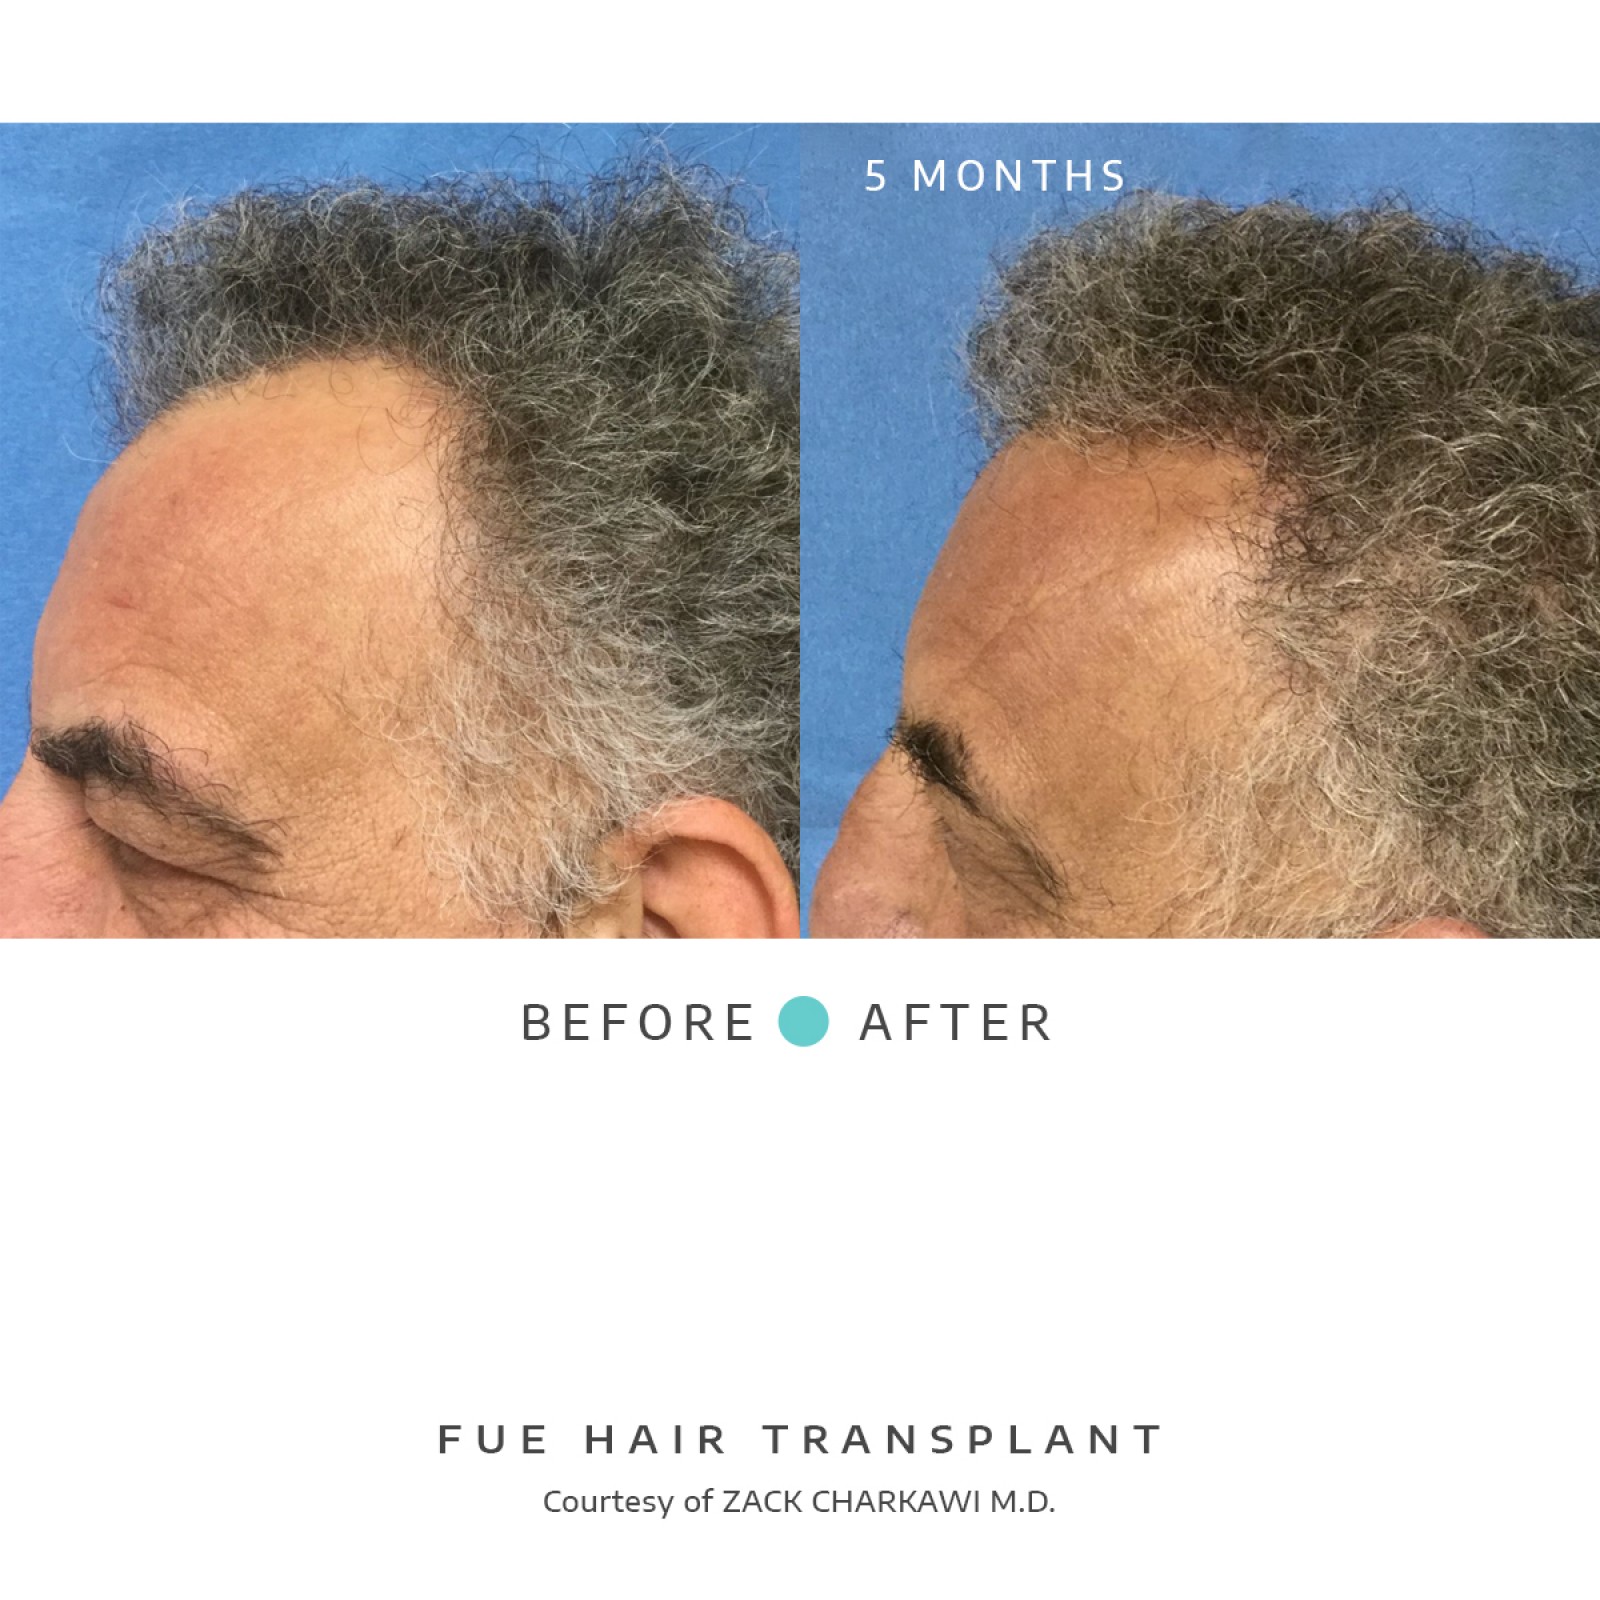 The left image, a close-up profile of a man, reveals thinning hair. The after image shows a restored hairline displaying natural-looking growth as a result of a successful transplant.